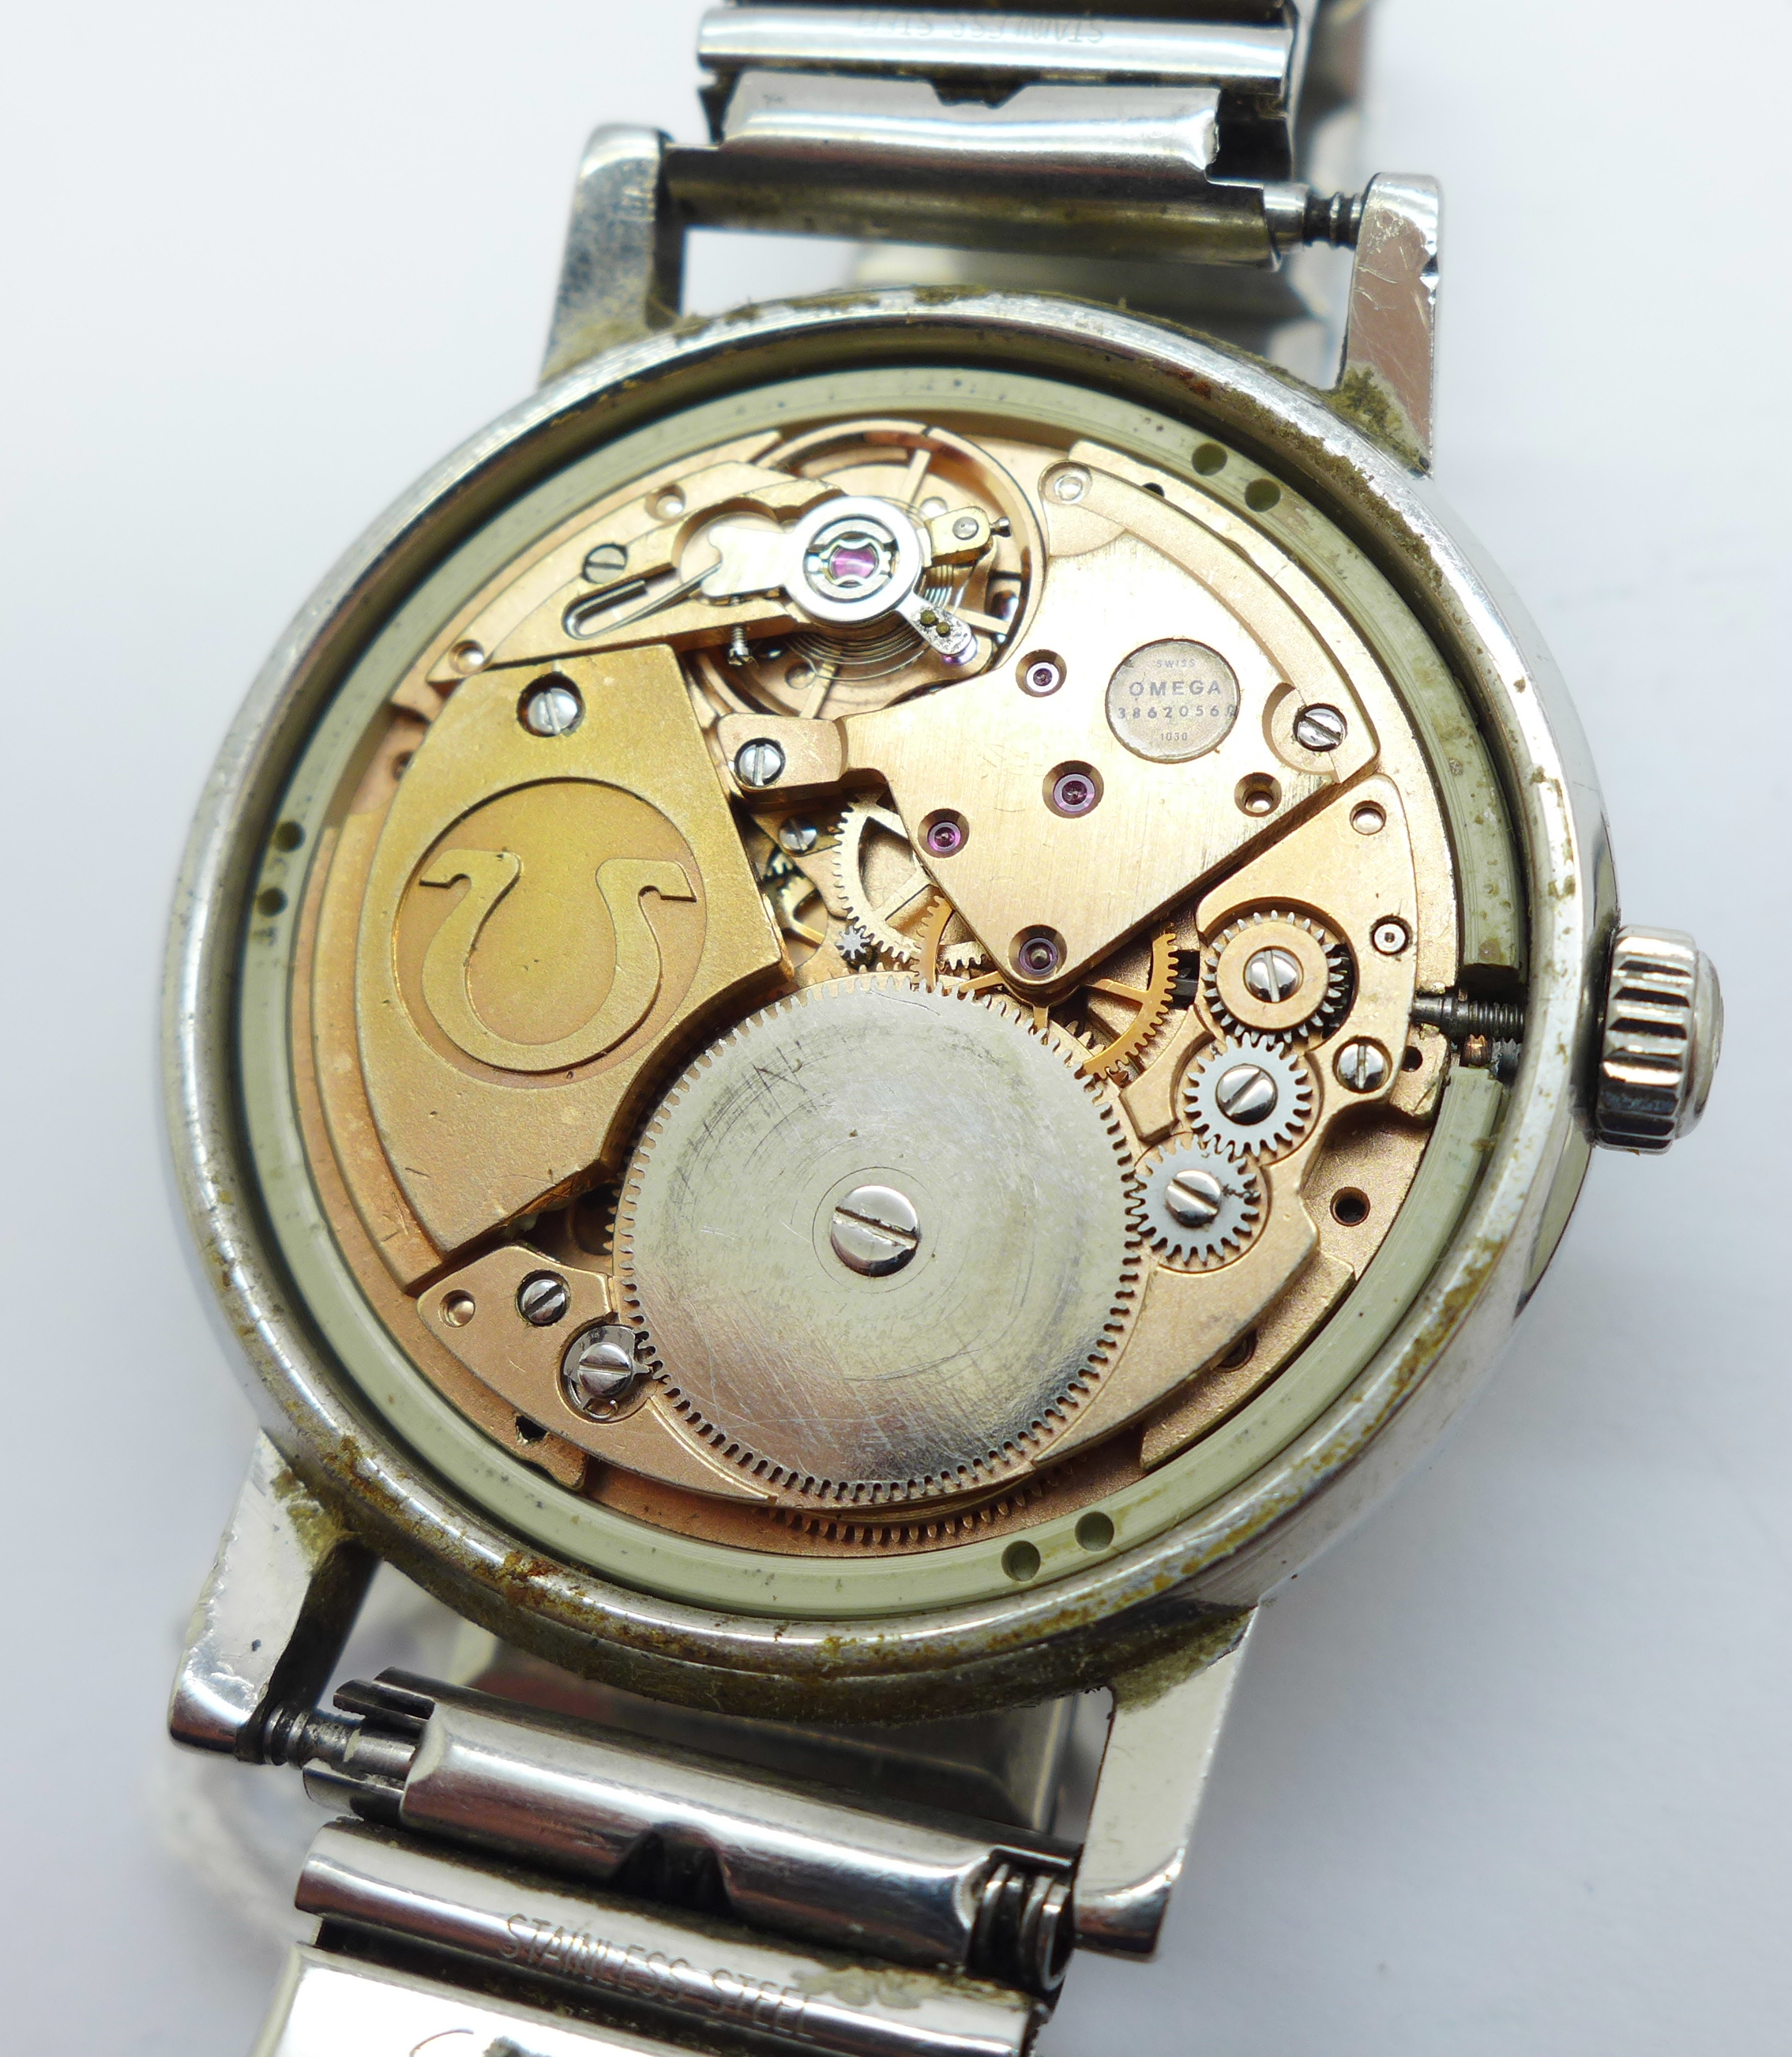 An Omega Geneve wristwatch with date, on a Speidel expanding bracelet, a/f - Image 8 of 8